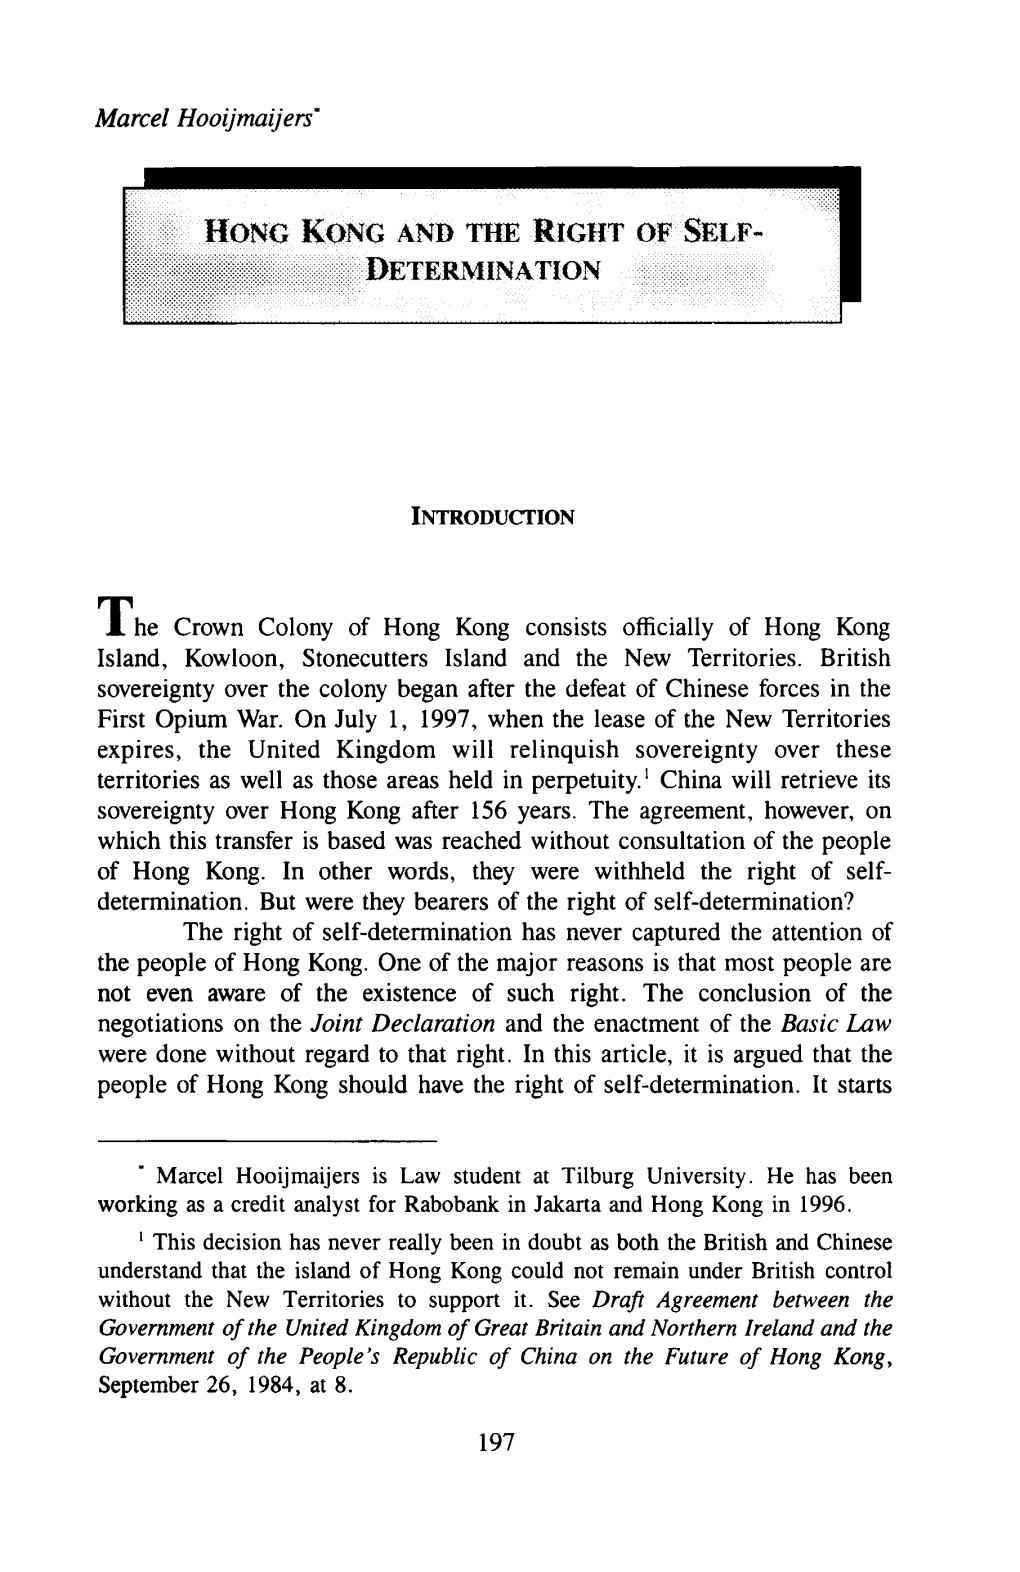 Hong Kong and the Right of Self- Determination